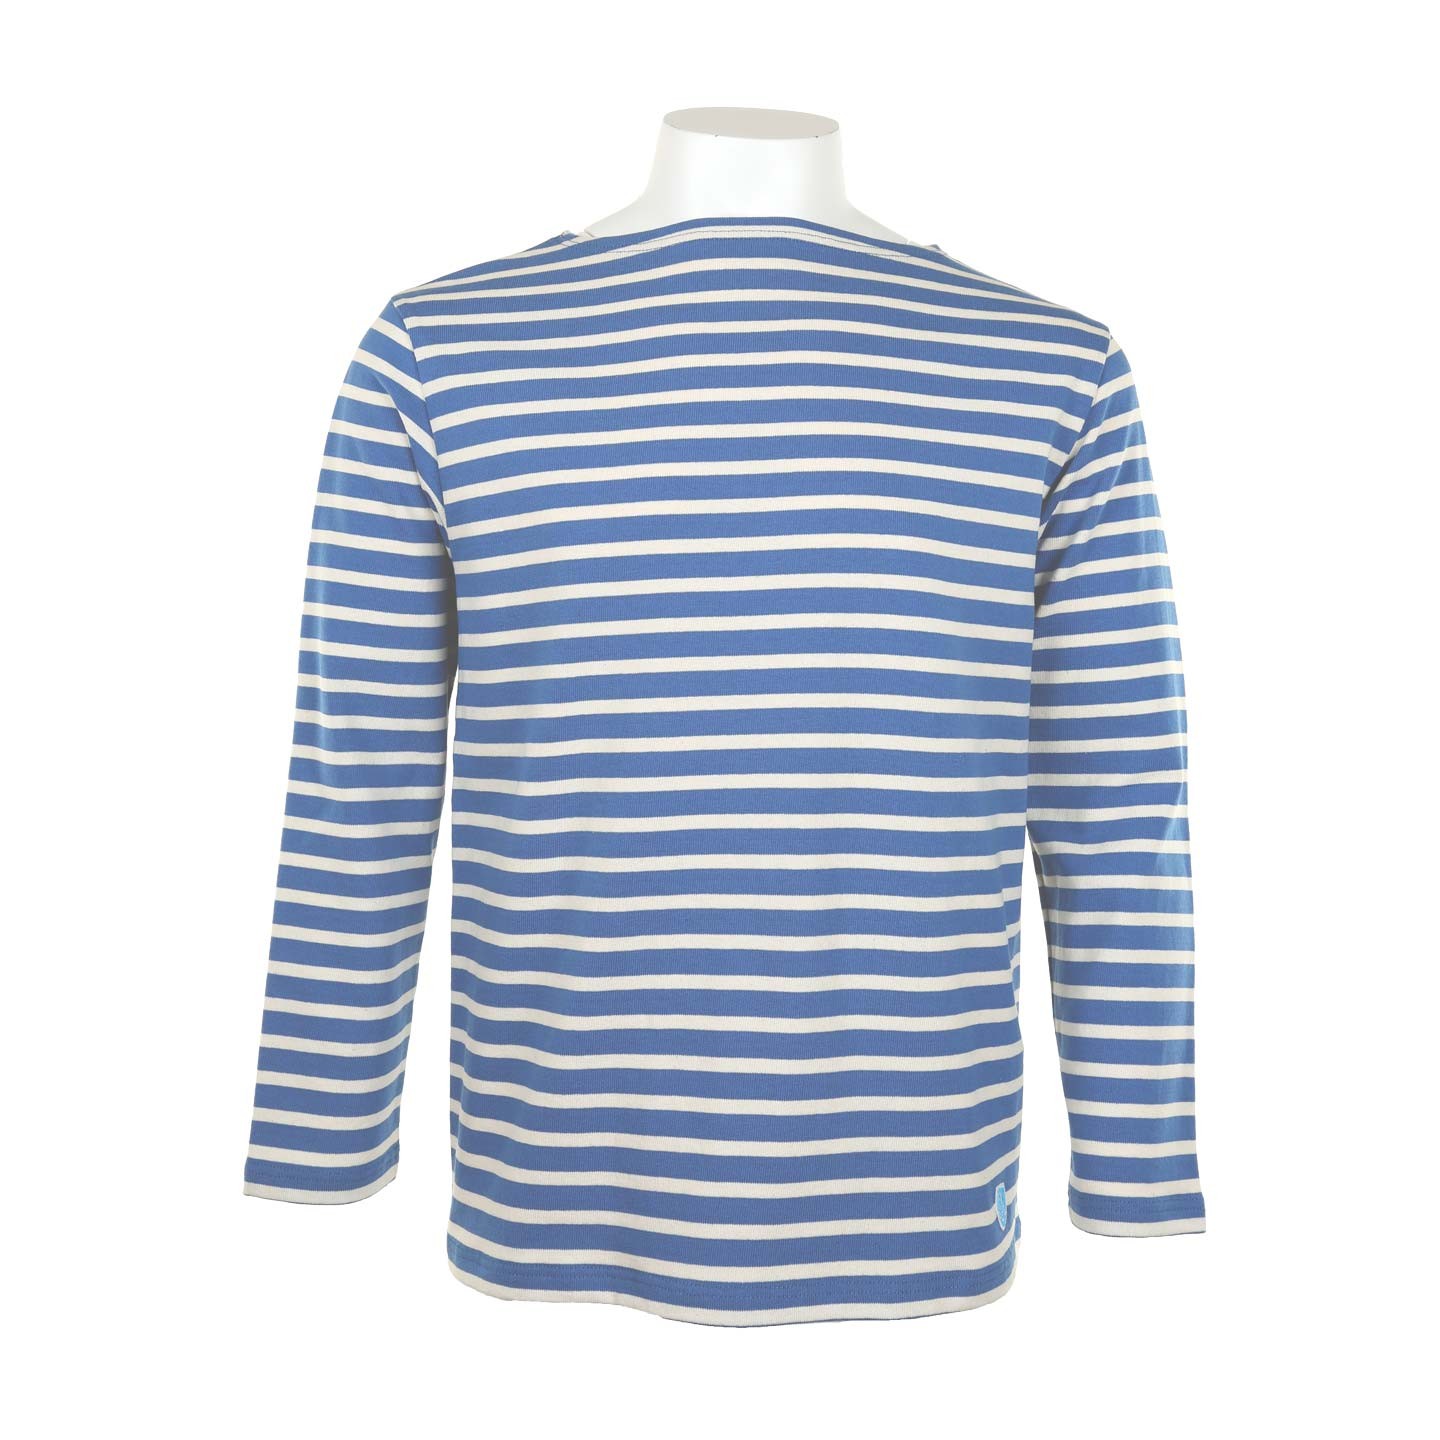 Striped shirt Ocean / Ecru, unisex made in France Orcival